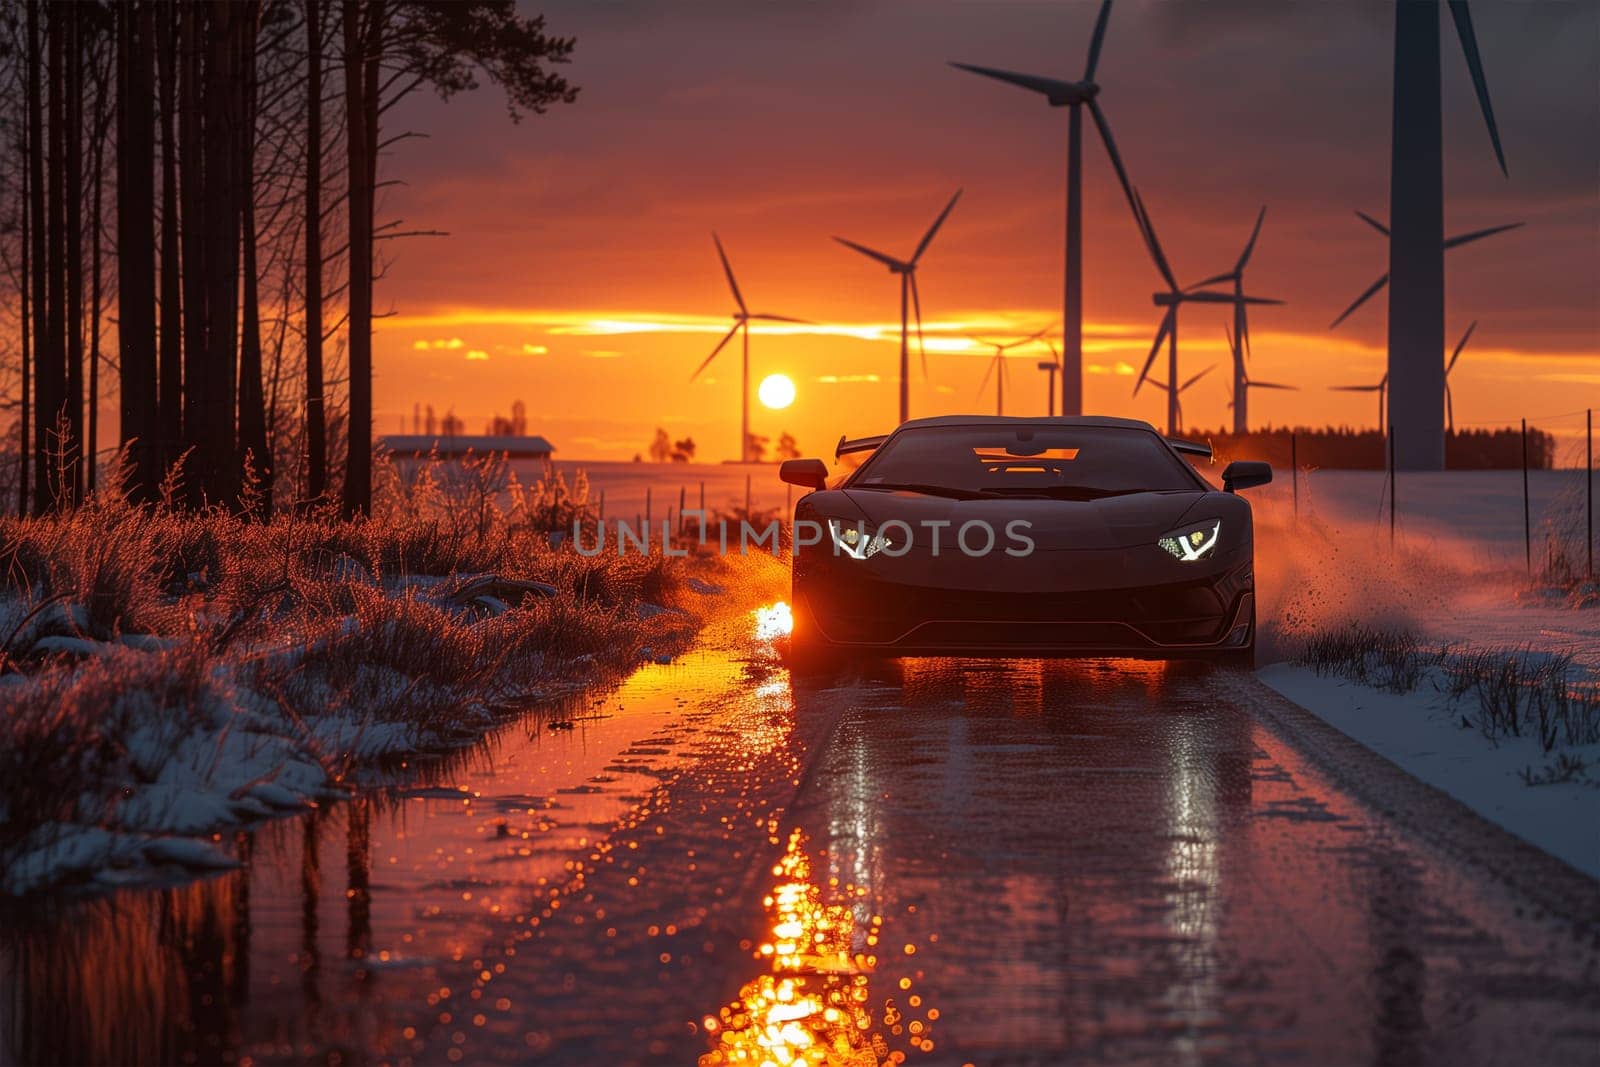 Car Driving Down Road With Wind Turbines in Background by Sd28DimoN_1976